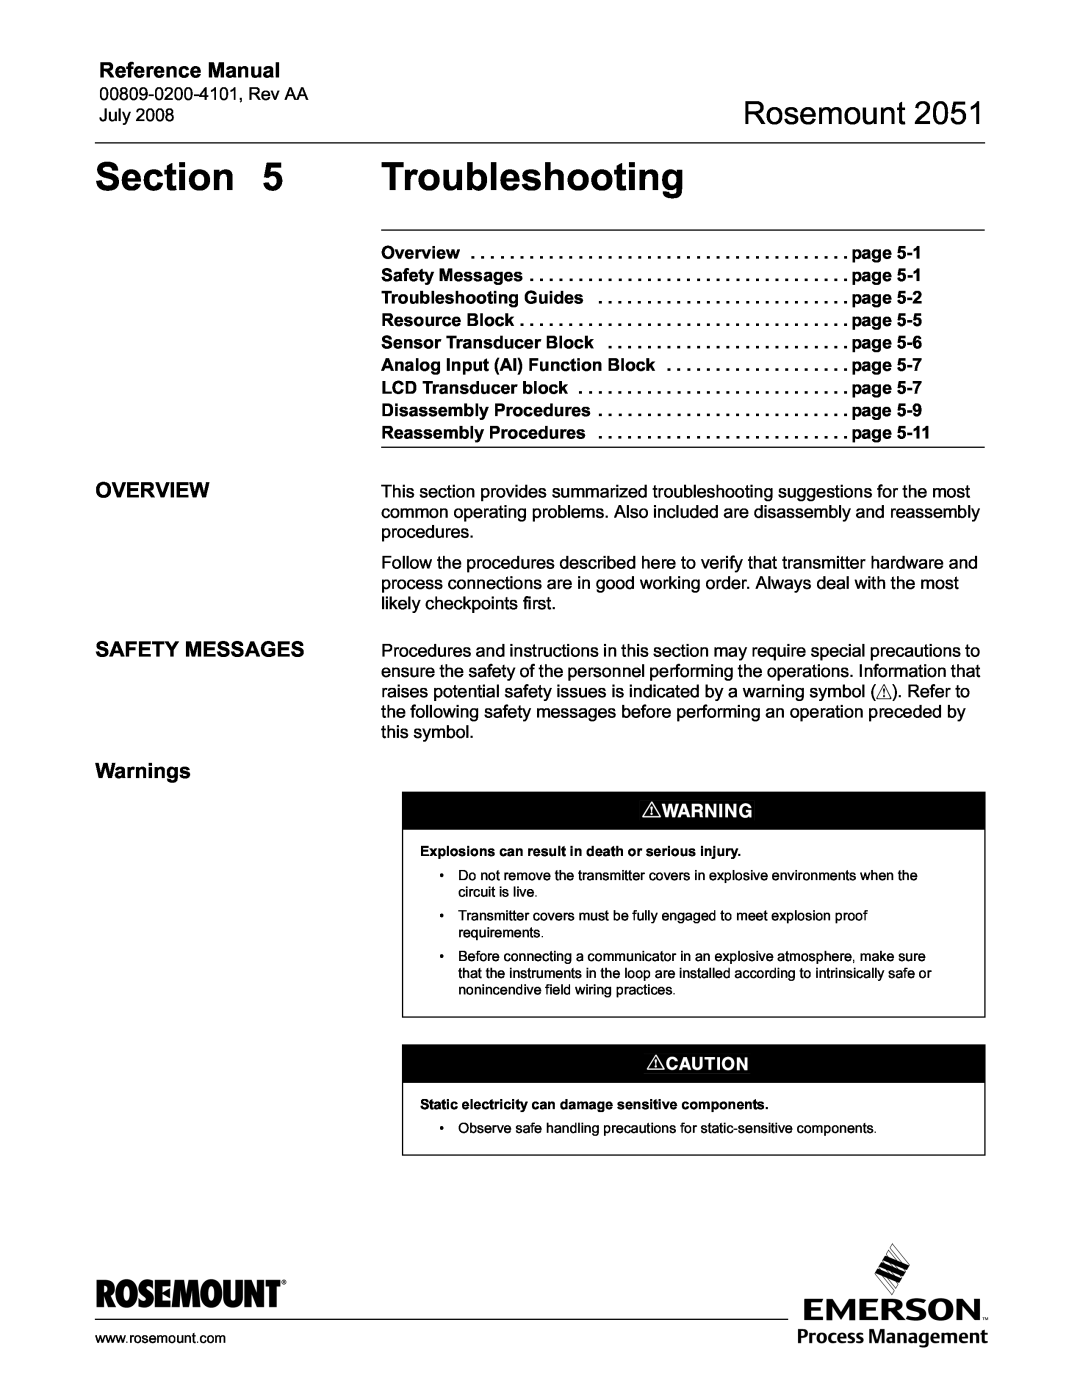 Emerson Process Management 2051 manual Troubleshooting, Rosemount, Reference Manual, OVERVIEW SAFETY MESSAGES Warnings 